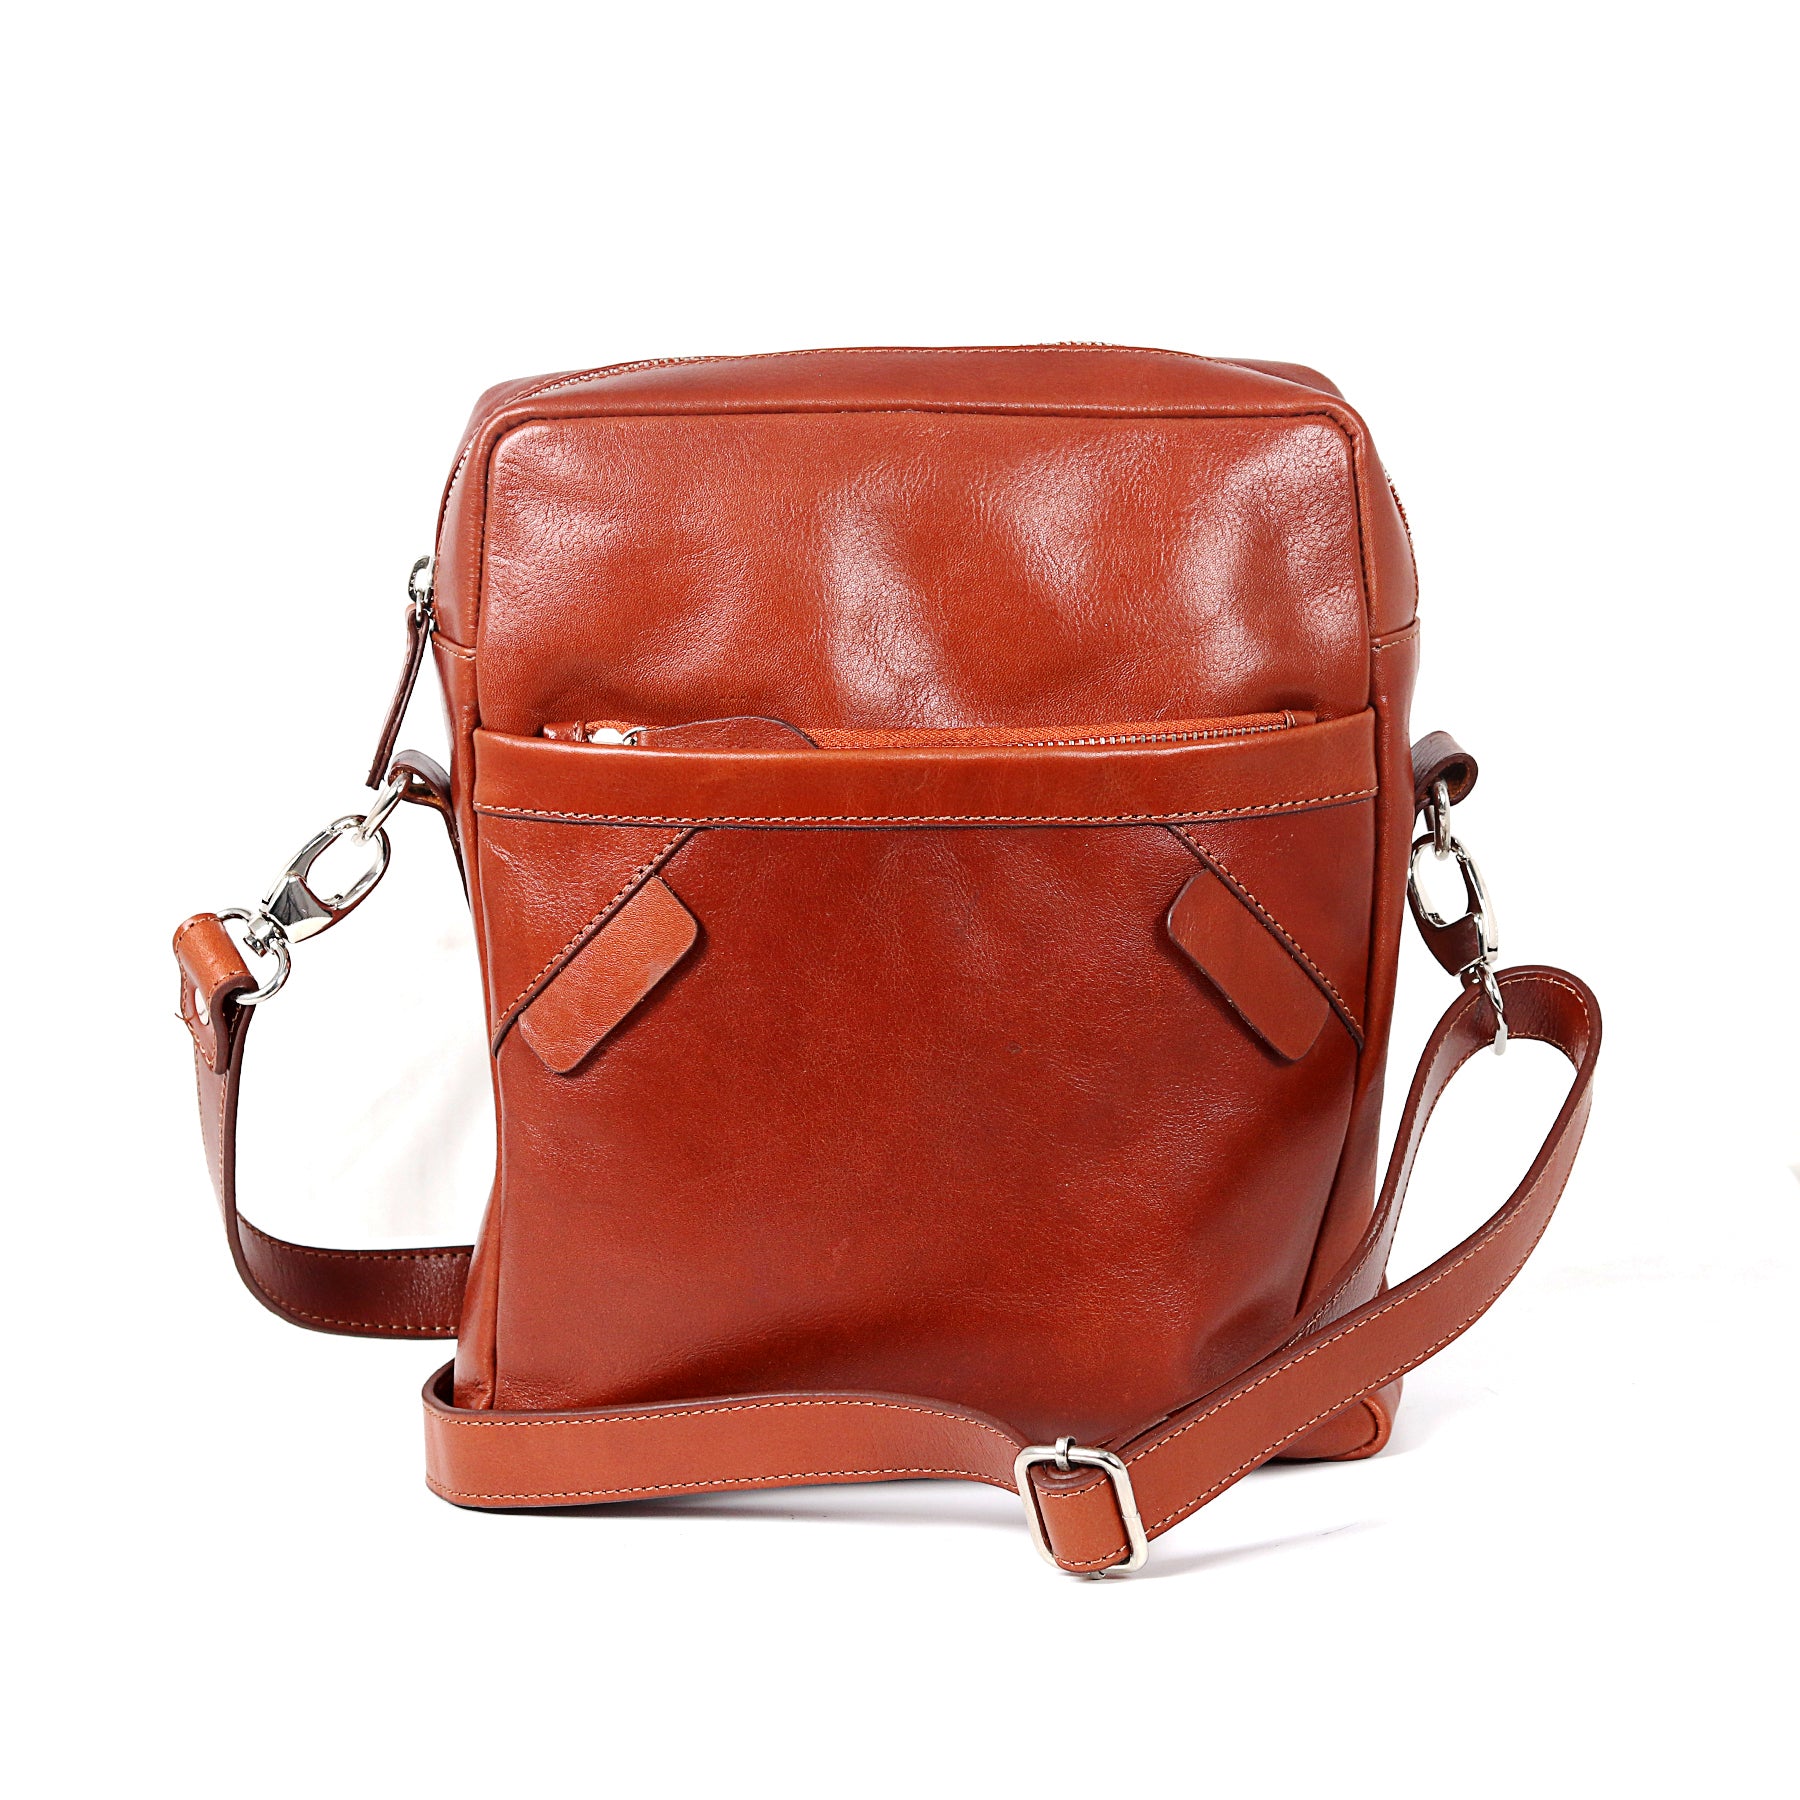 Zays Premium Oil Pull Up Leather Messenger Bag (Red Brown) - ZAYSBG06